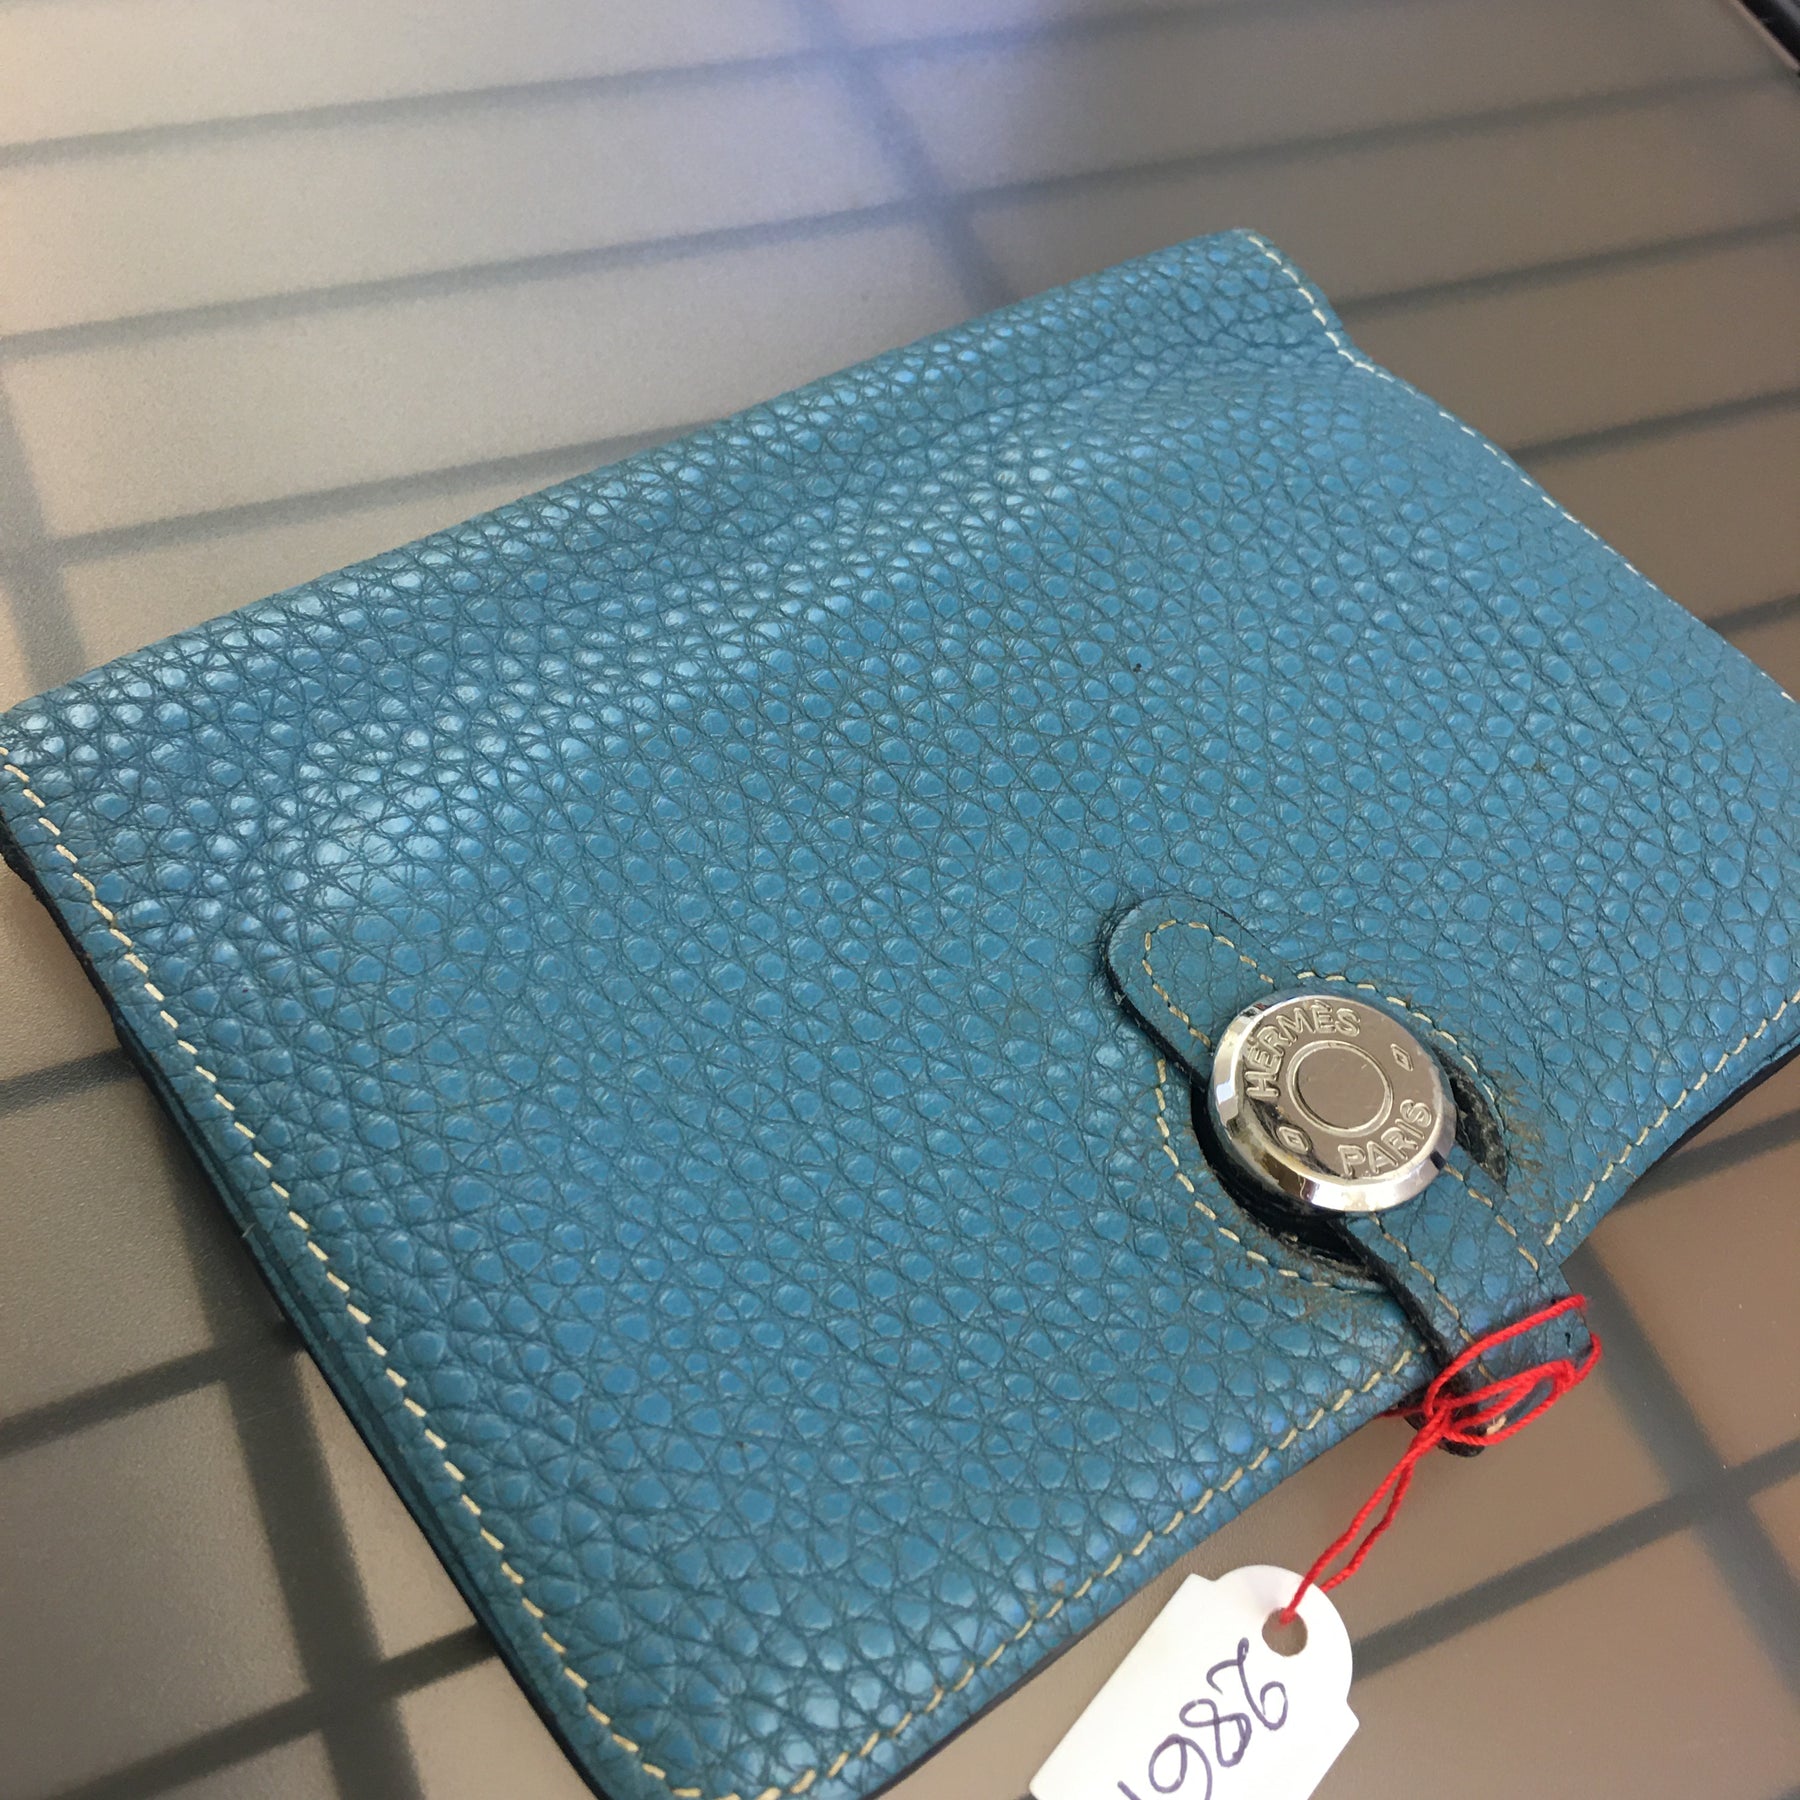 Hermes-Dogon Compact Wallet